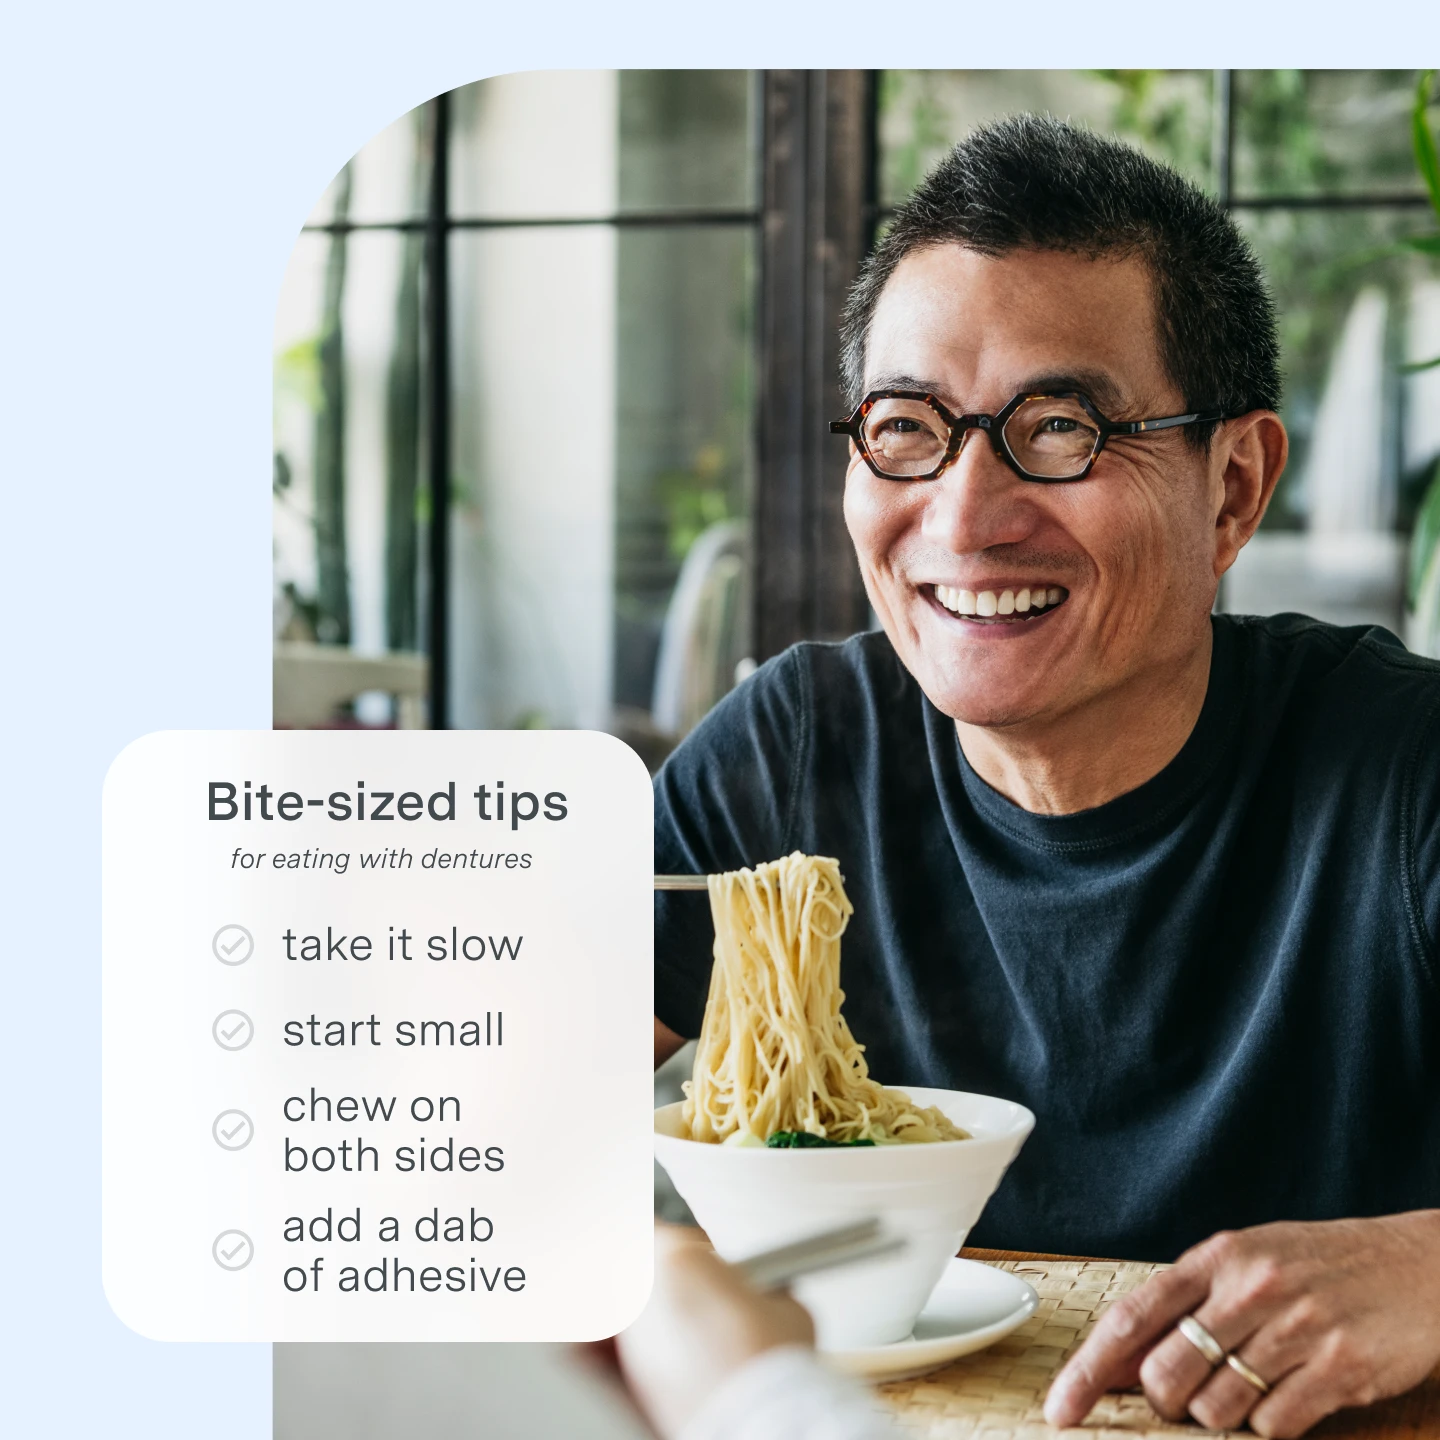 How to eat with dentures. Bite size tips for eating with dentures: take it slow, start small, chew on both sides, add a dab of adhesive. 